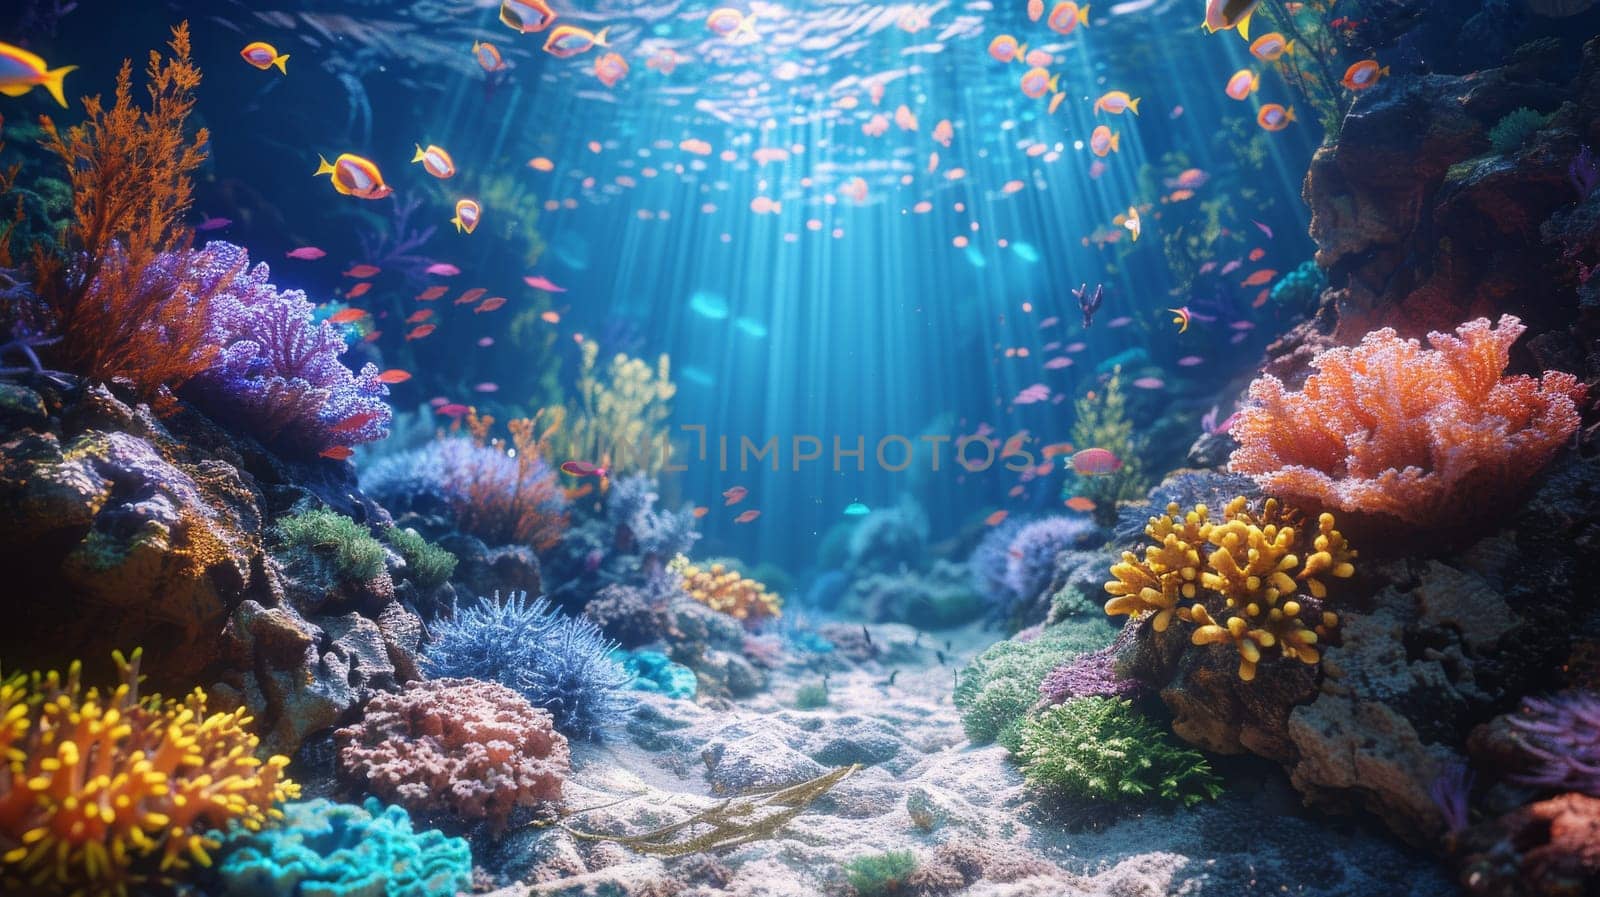 A colorful coral reef with a variety of fish swimming around. Scene is peaceful and serene, as the vibrant colors of the coral and fish create a sense of calmness and tranquility